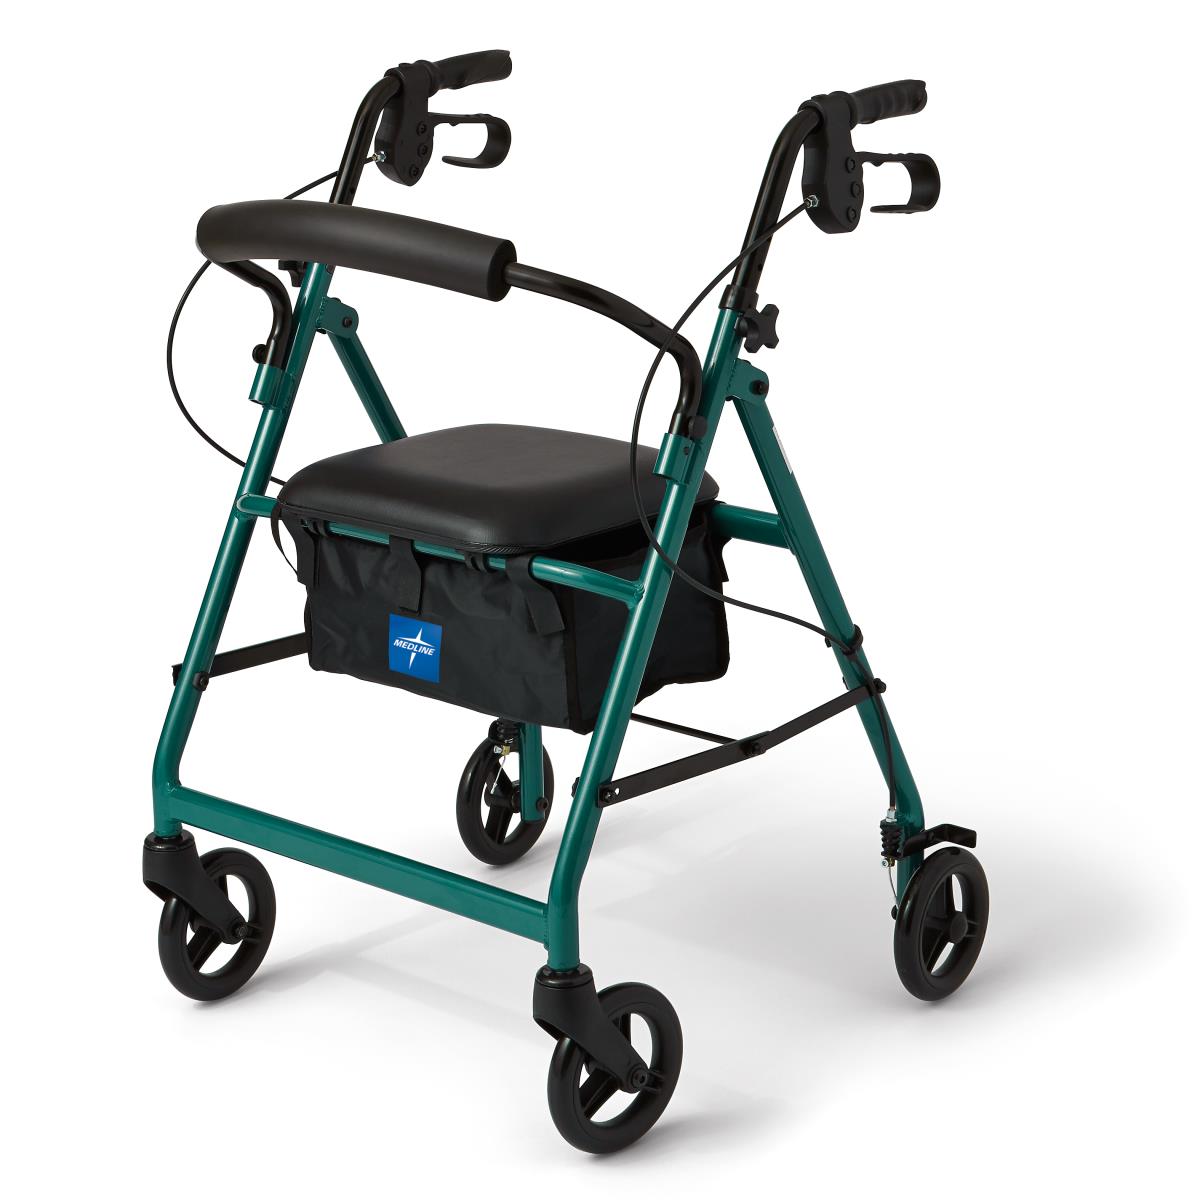 Medline Durable Aluminum Fold Up Mobility Rollator Walker with 6 Inch Wheels and Seat for Adults